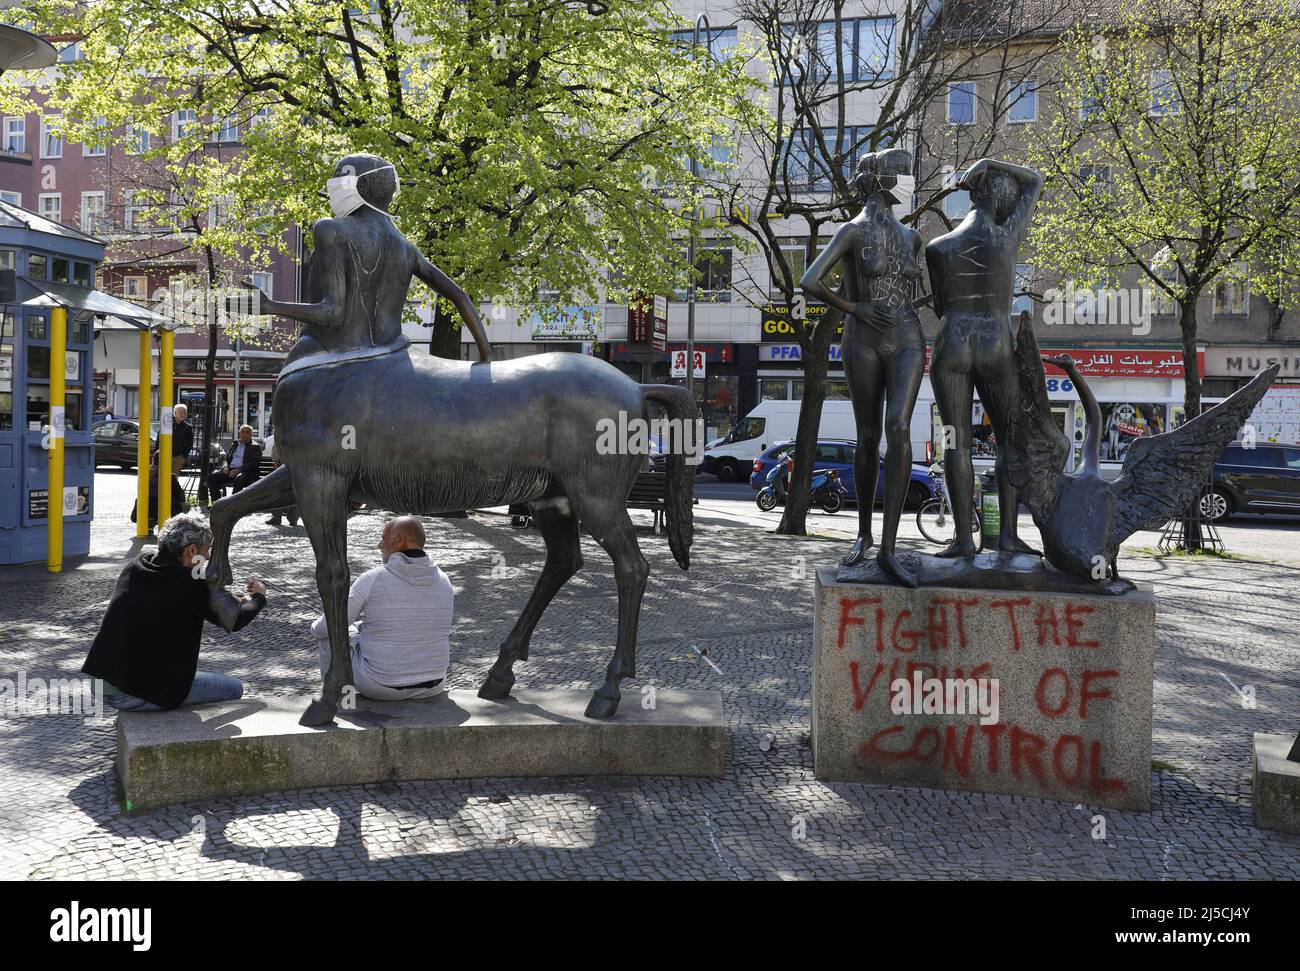 'Unknown persons have put mouth guards on a group of figures titled ''Linda with Swan, Cyclops and Centaur'' at Berlin's Karl-Marx-Platz and spray-painted it with the phrase ''Fight the Virus of Control''. The contact ban in force because of the Corona pandemic has been extended for a few weeks. [automated translation]' Stock Photo